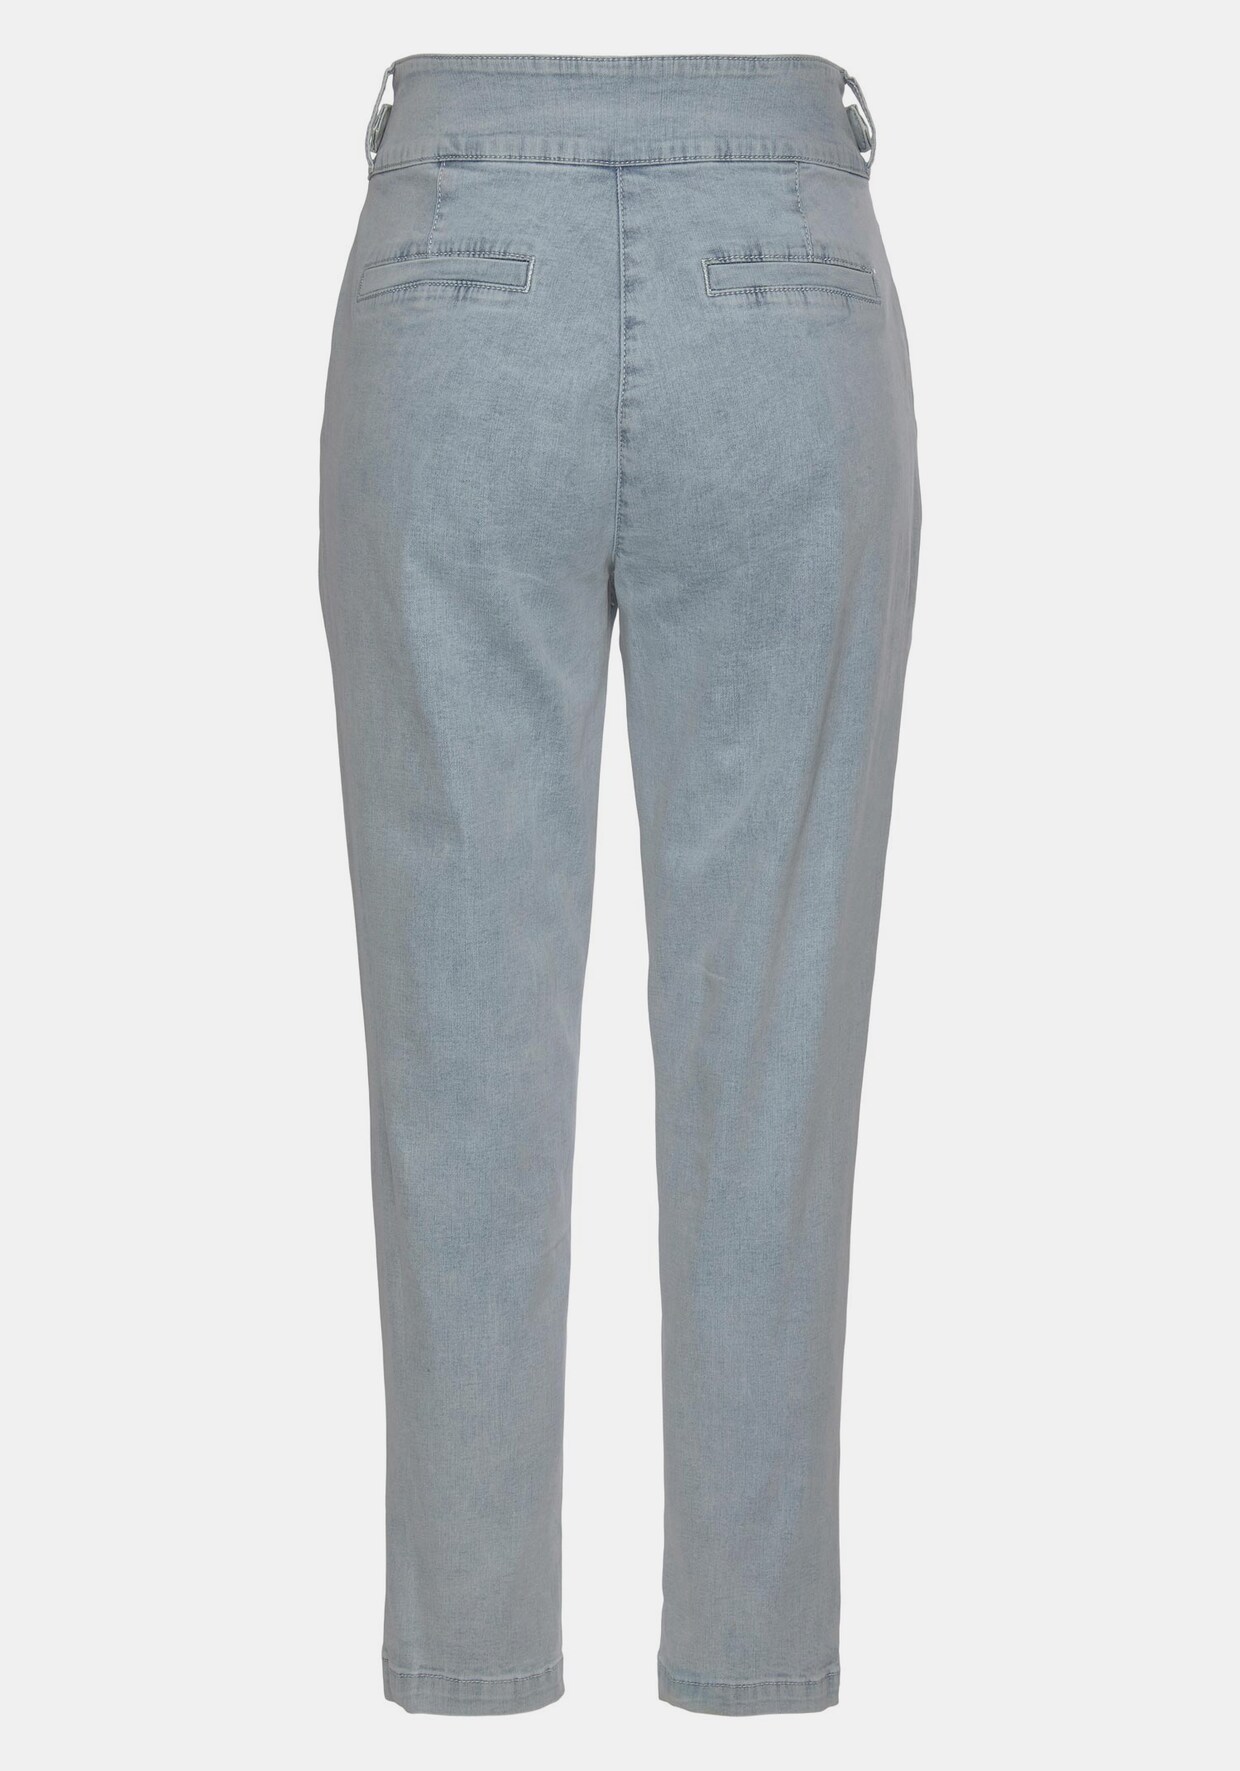 Buffalo Bequeme Jeans - light-blue-washed